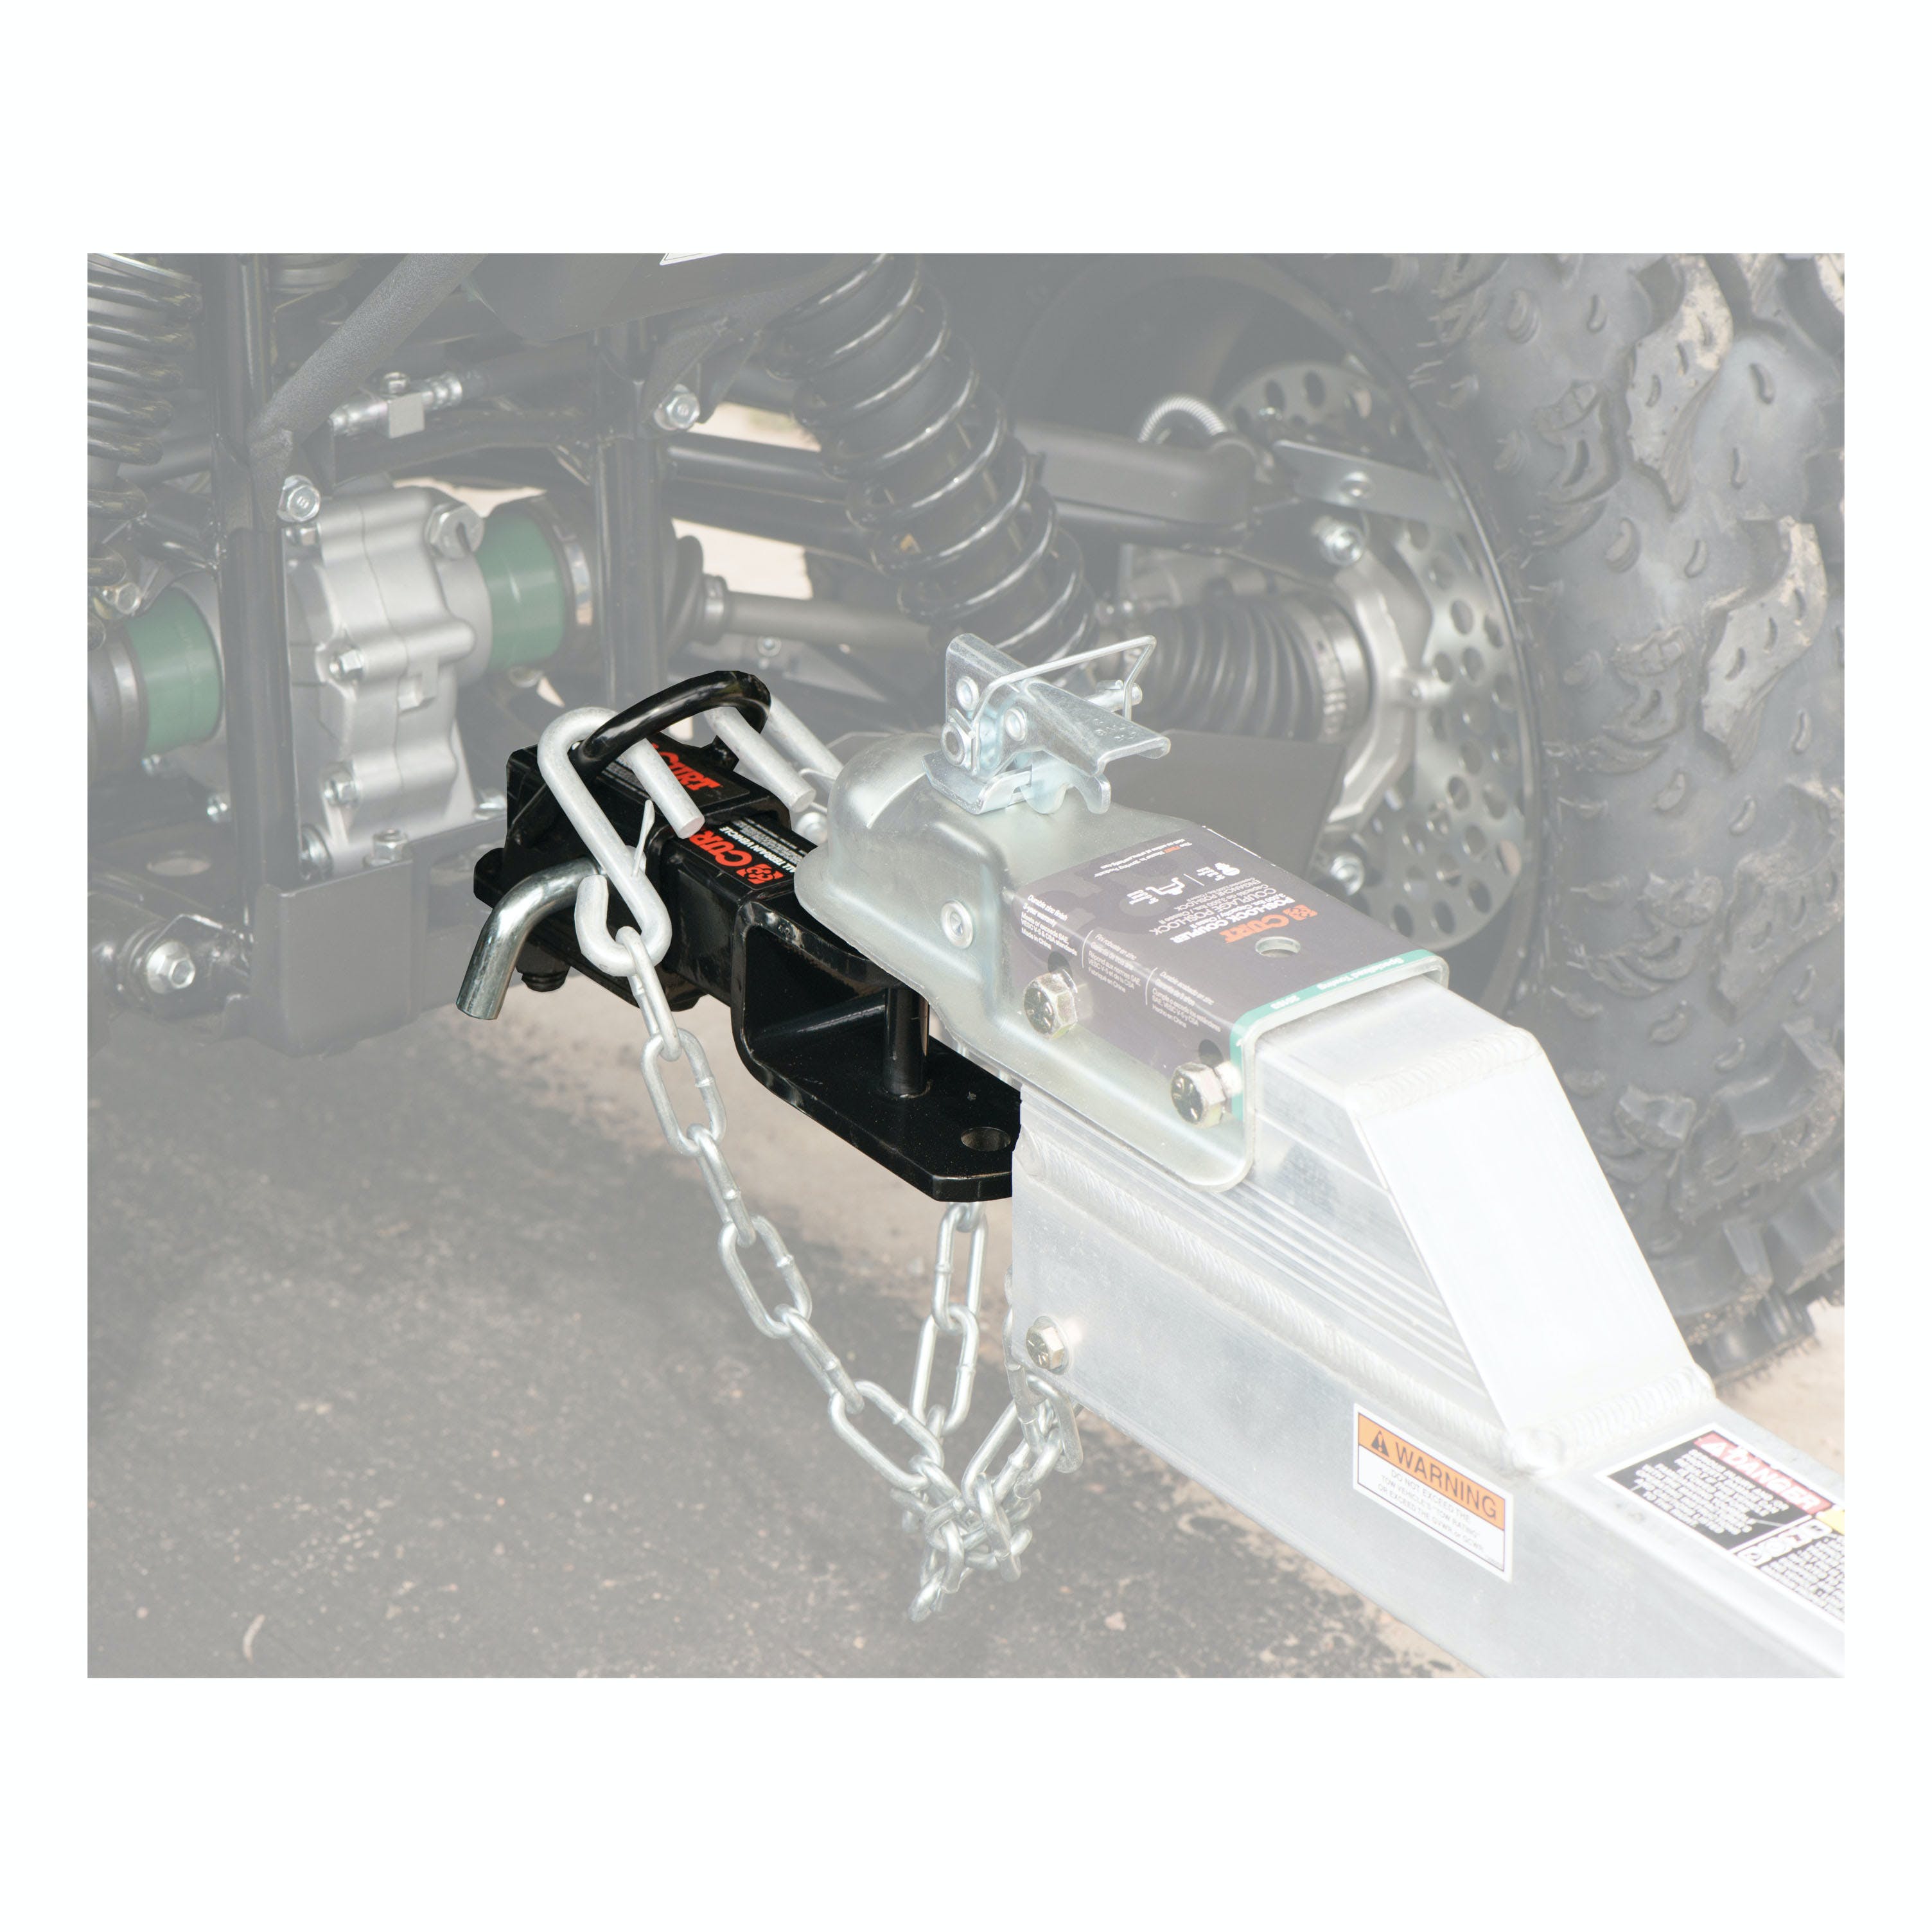 CURT 45029 ATV Towing Starter Kit with 2 Shank and 1-7/8 Trailer Ball